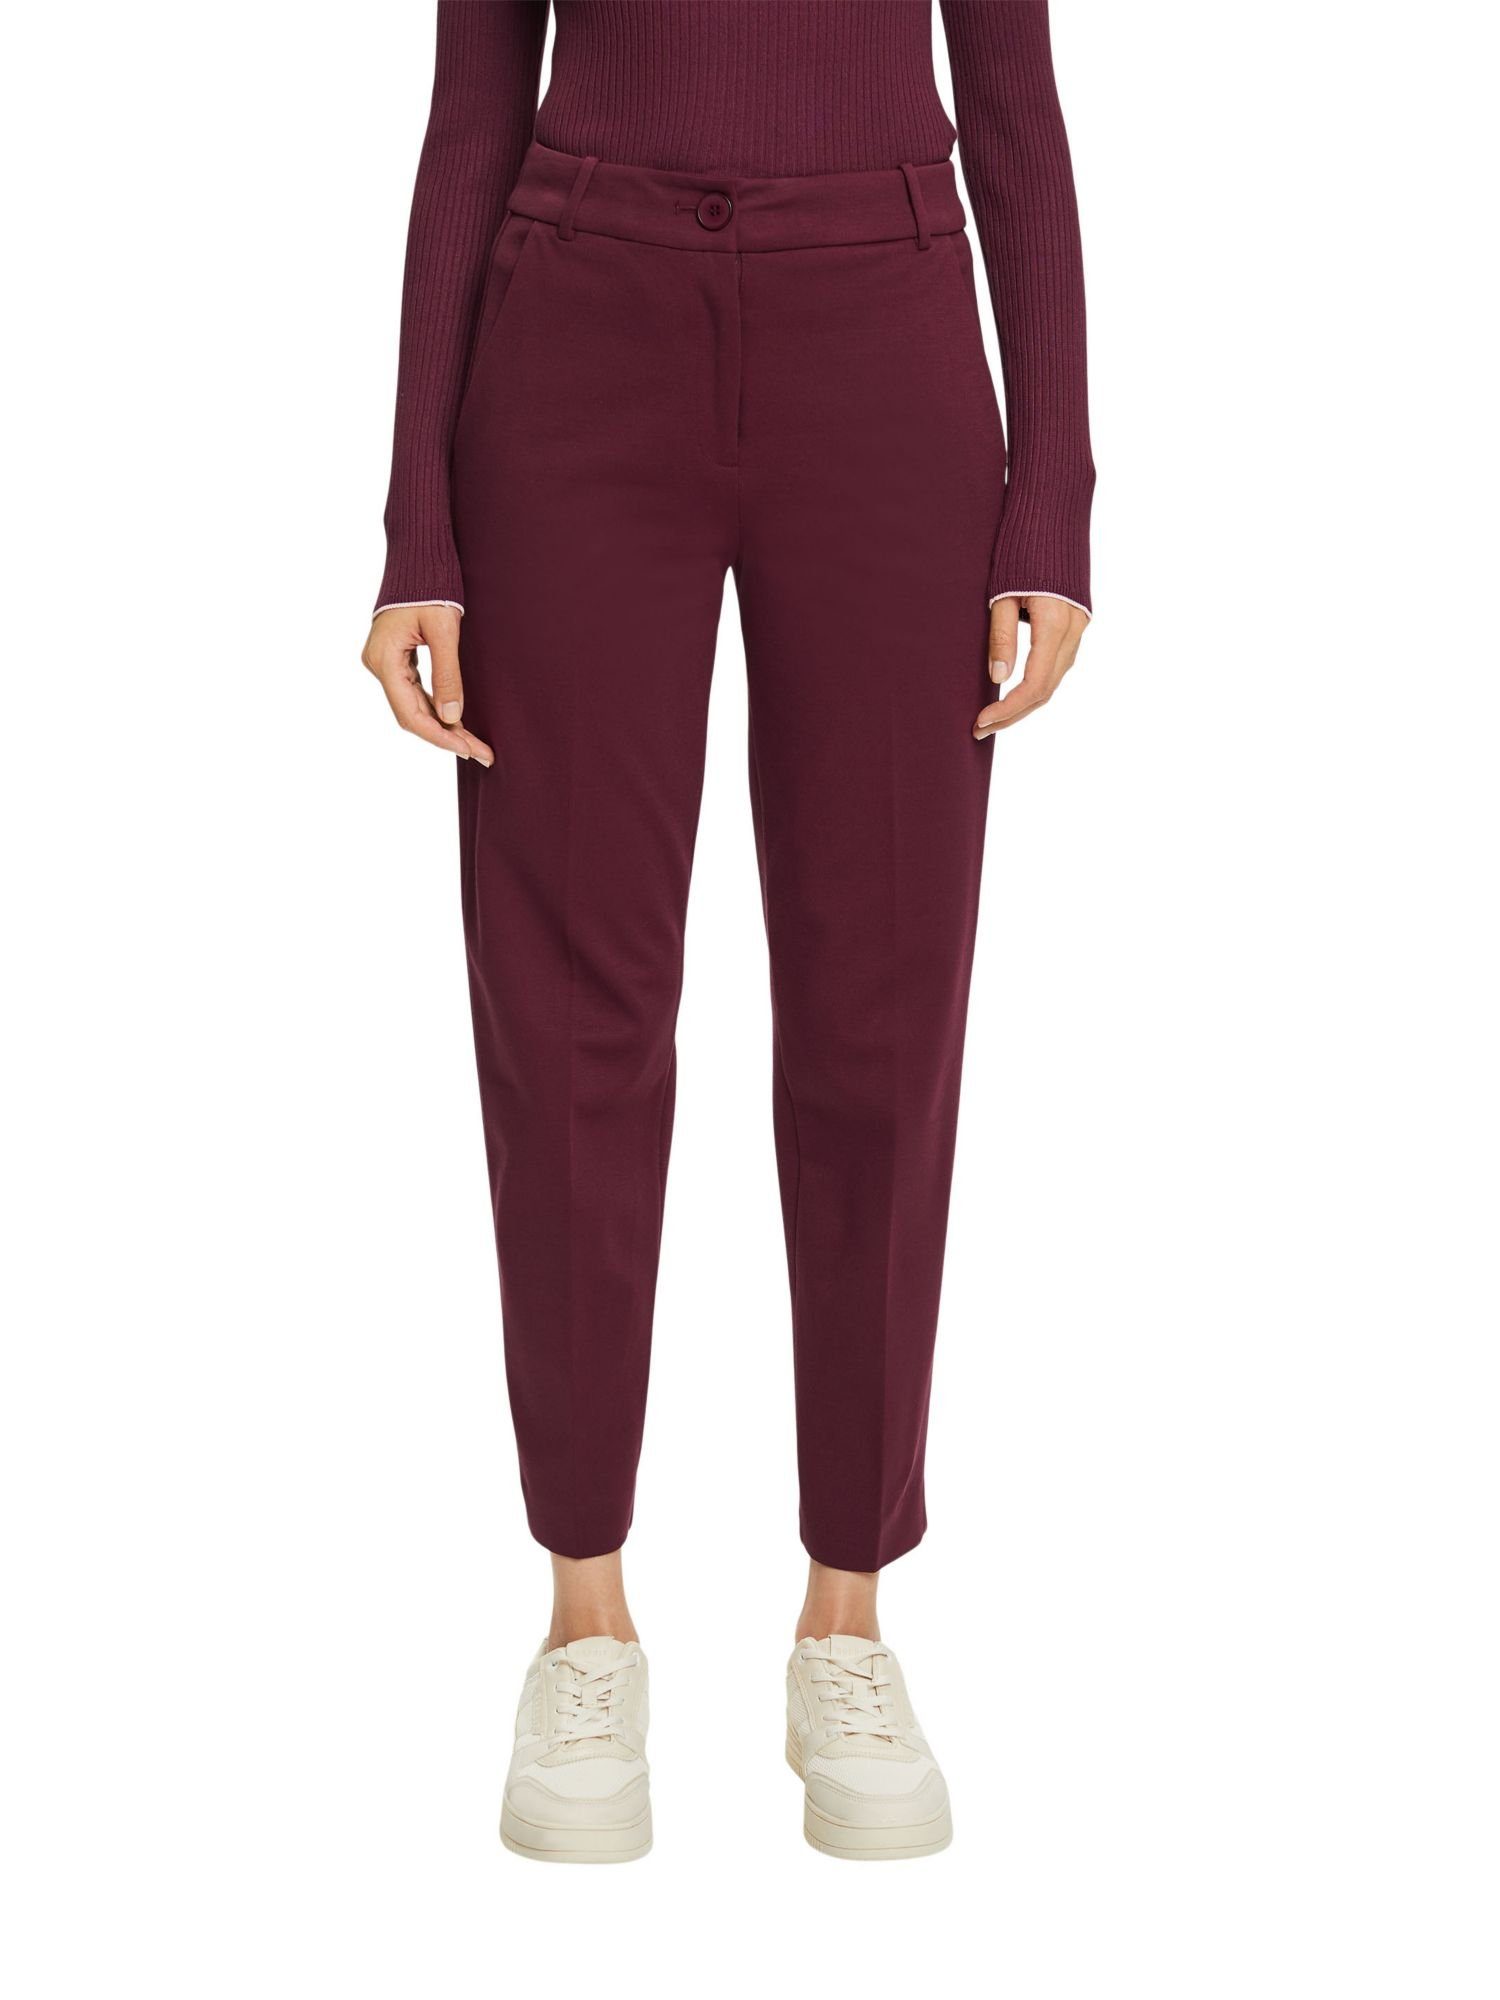 Tapered Stretch-Hose & AUBERGINE Esprit SPORTY Collection Match Pants PUNTO Mix